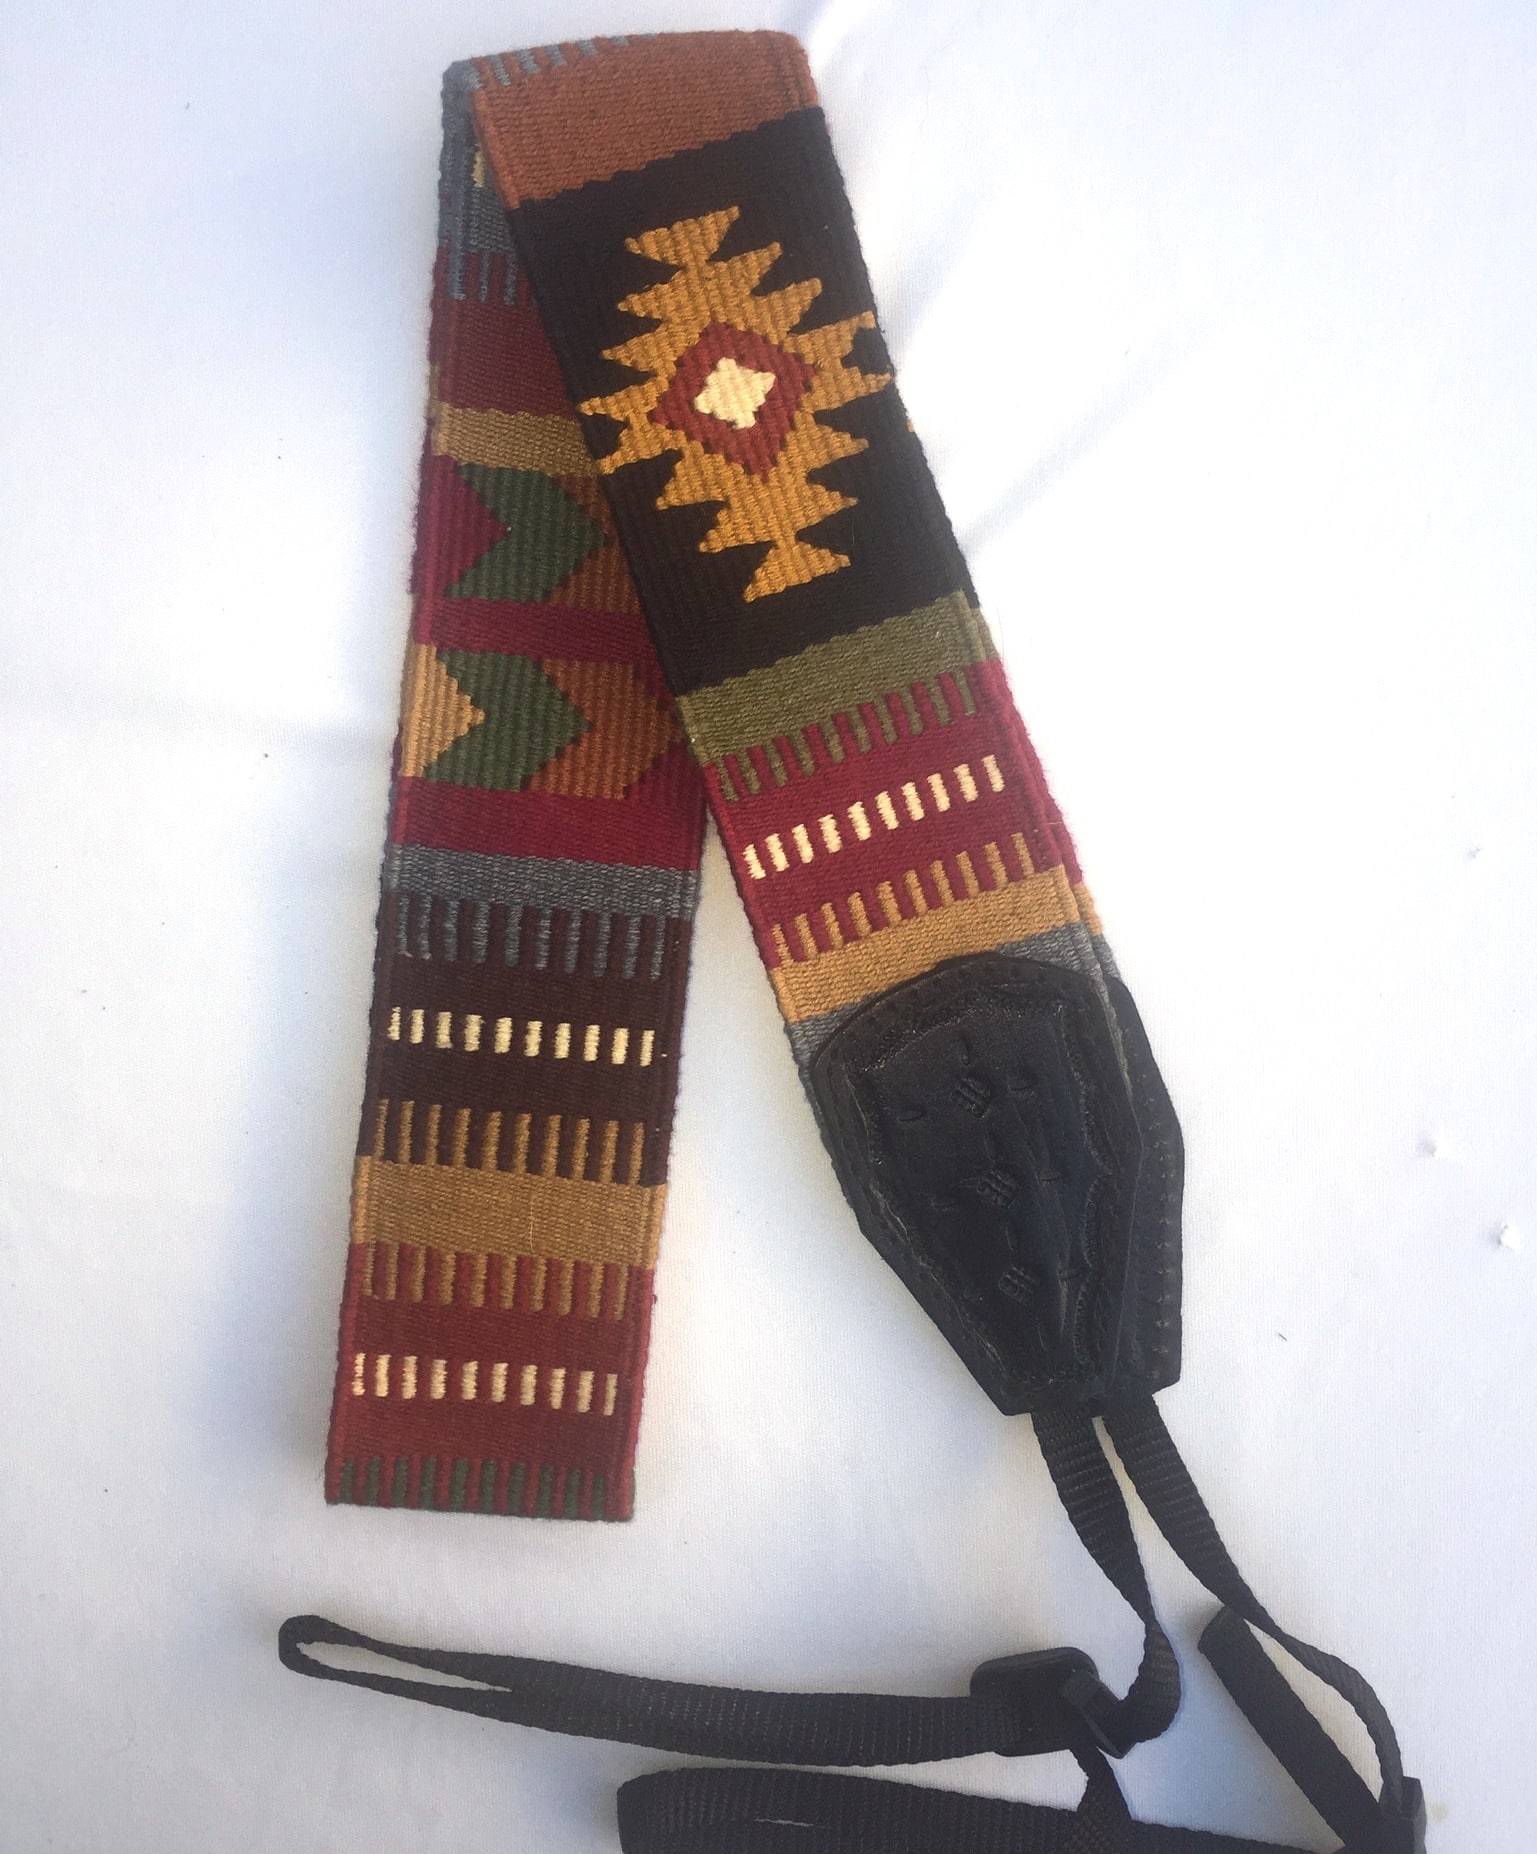 Handwoven Cotton and Leather Camera Strap - Earth Tones with Diamonds and Arrows Pattern